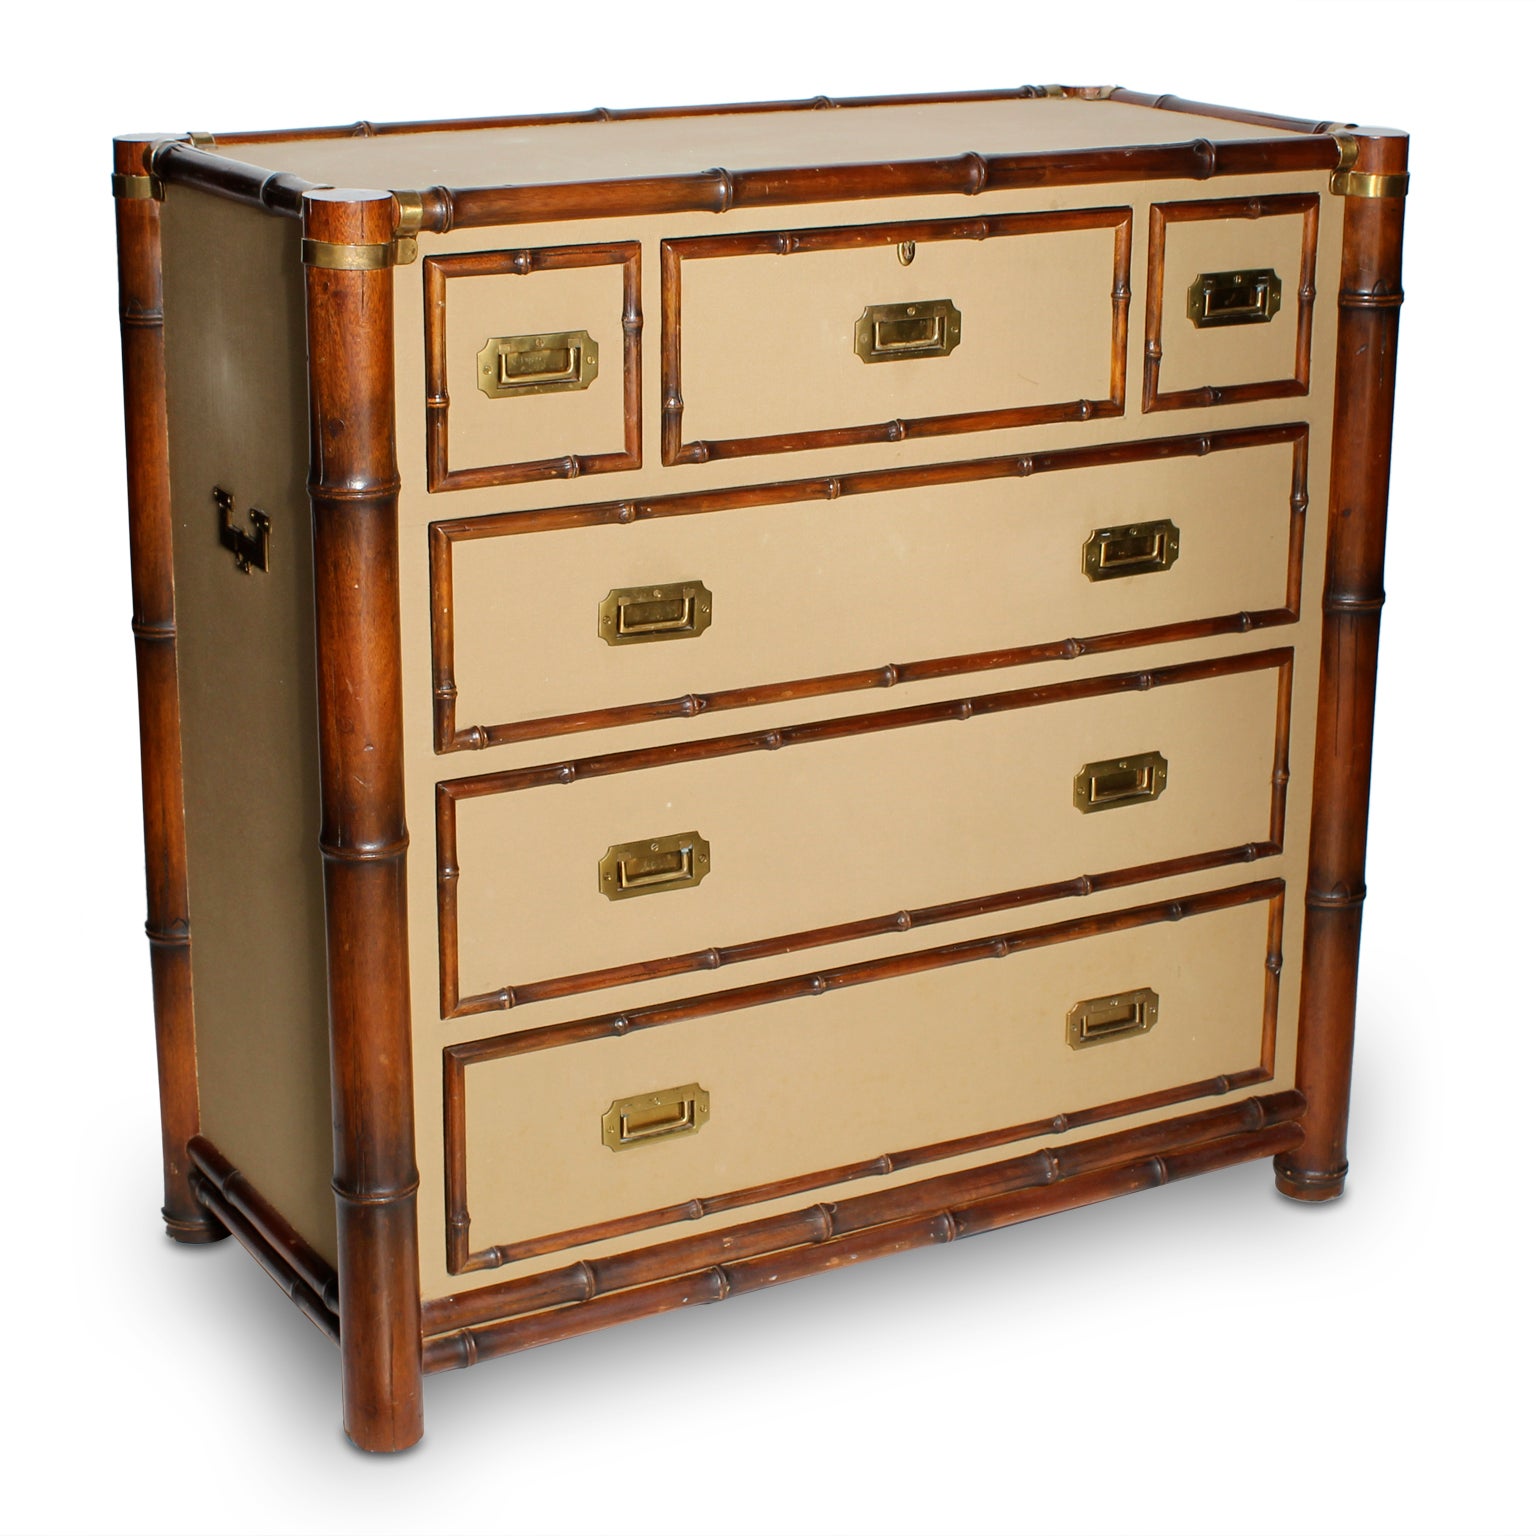 Ralph Lauren Upholstered Bamboo Campaign Style Chest